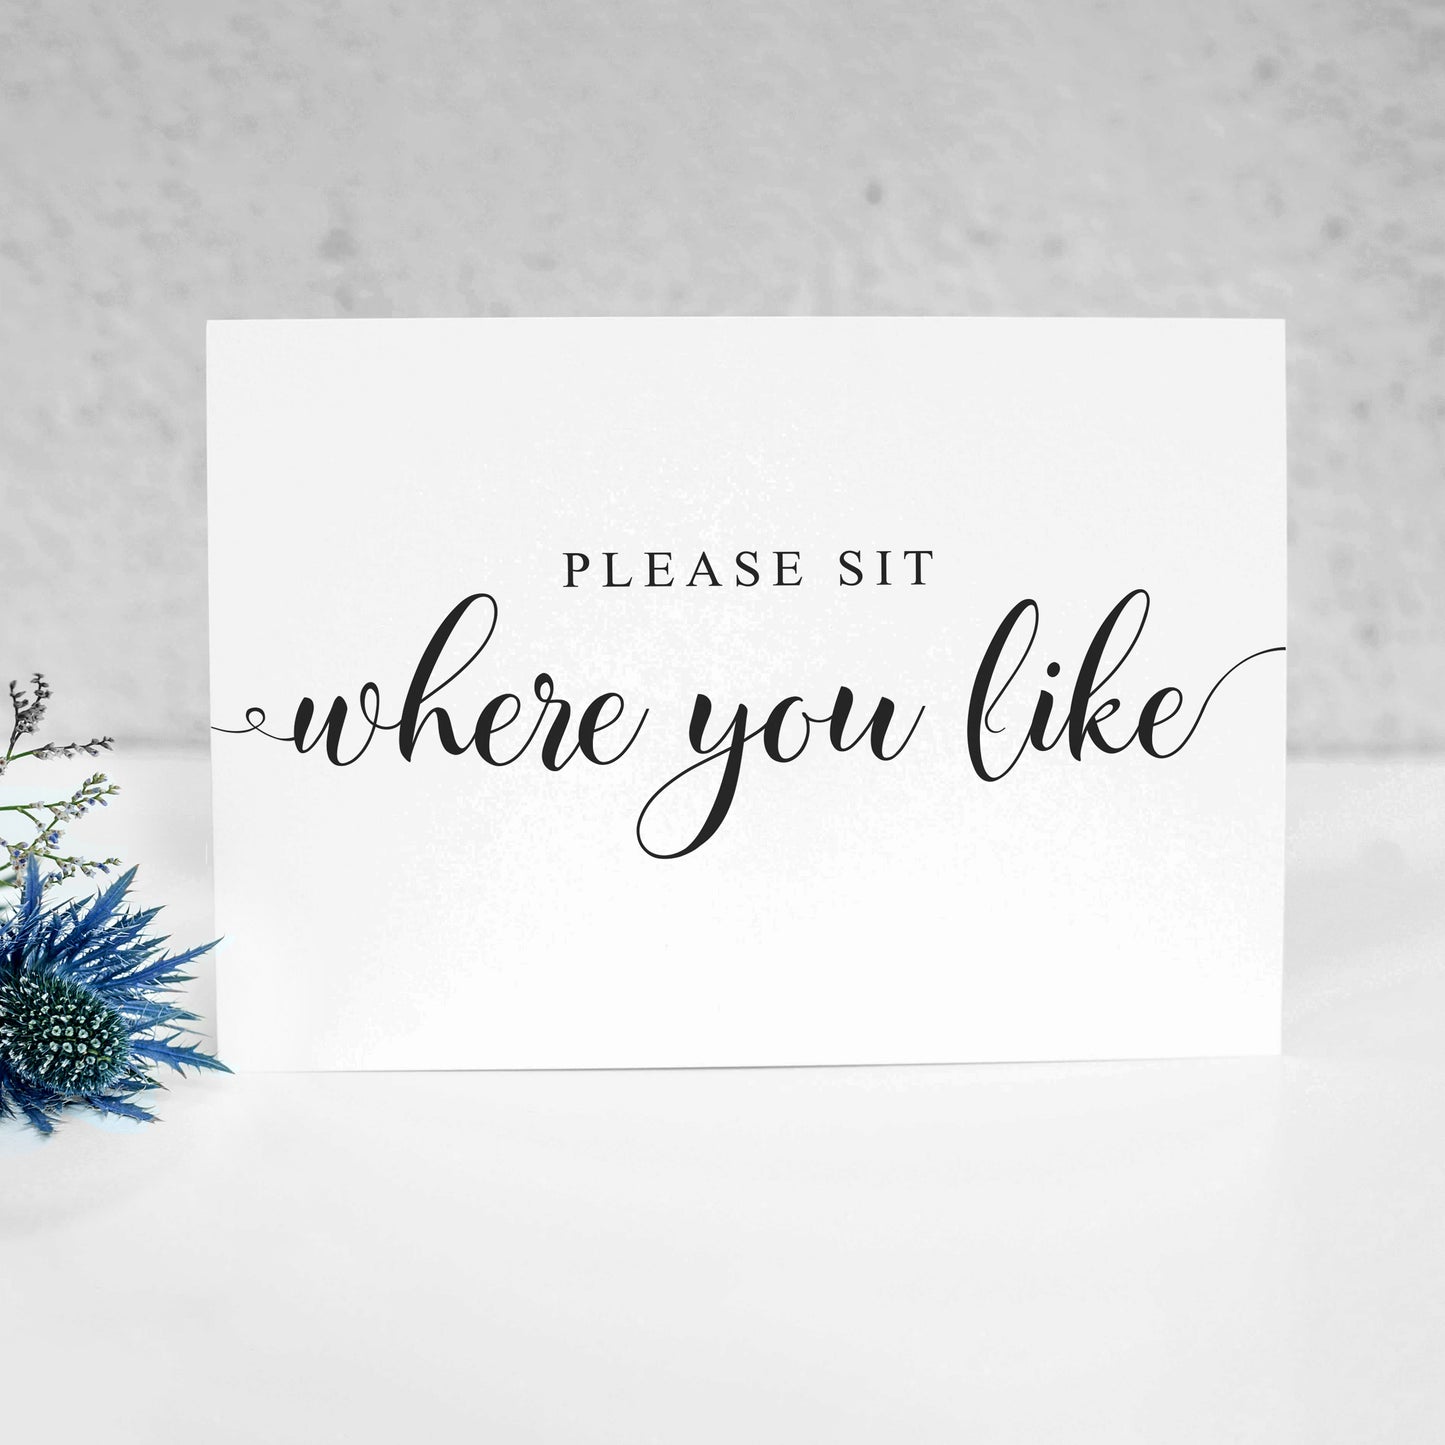 5x7 please sit where you like sign printed on card